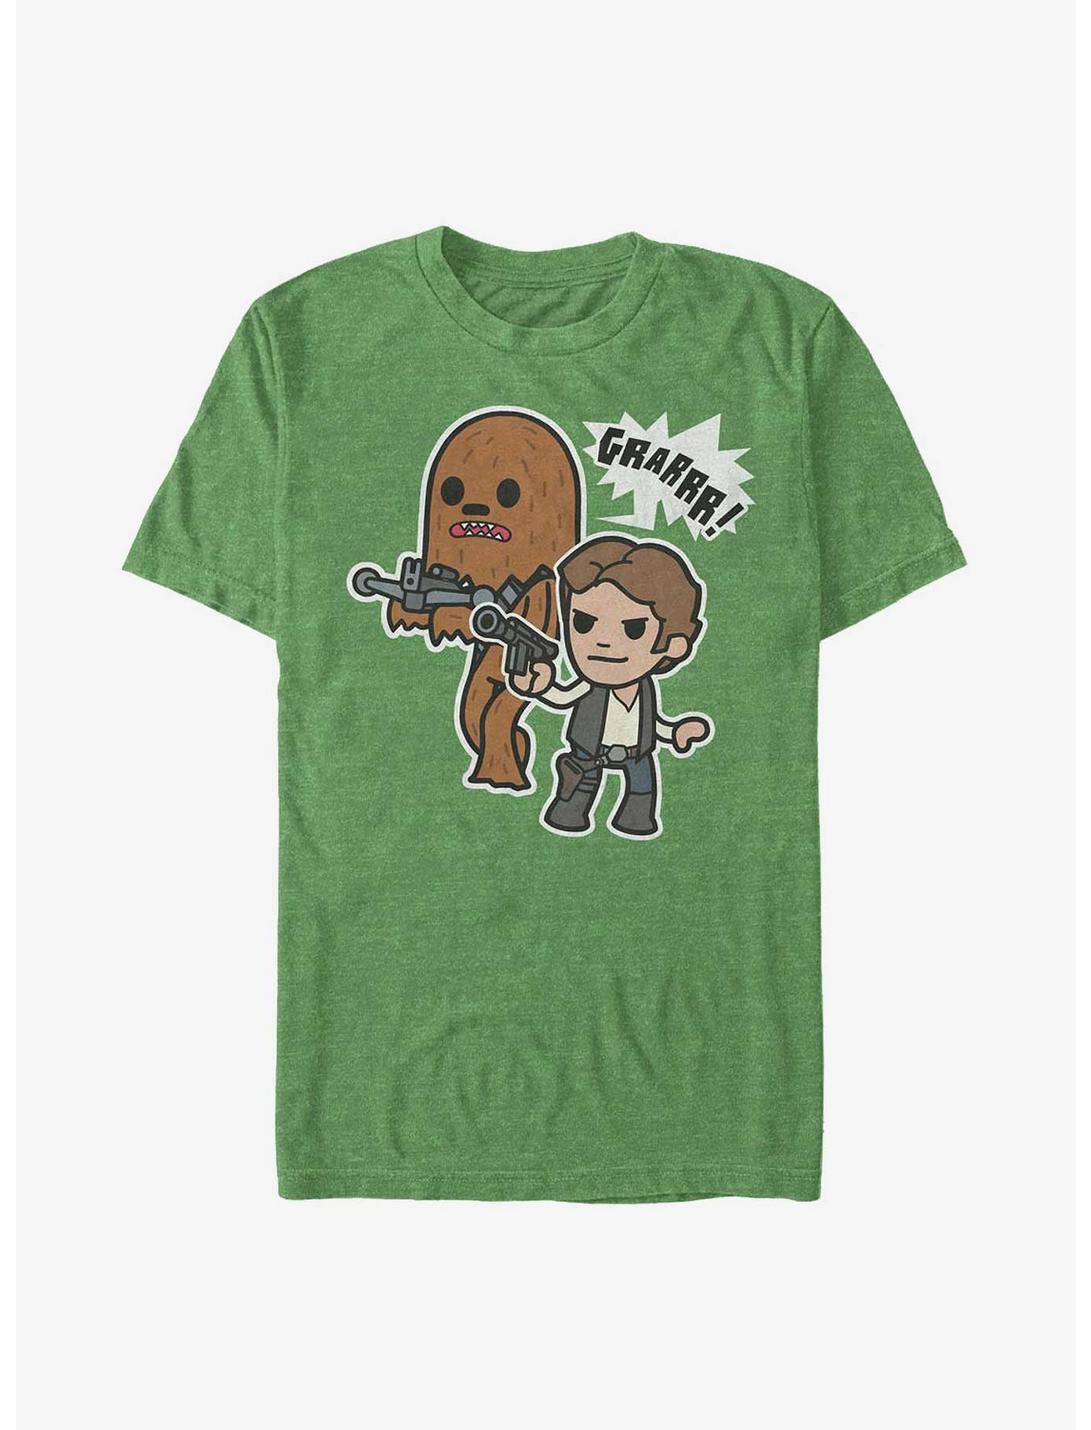 Star Wars Han Solo And Chewbacca Girls T-Shirt, , hi-res